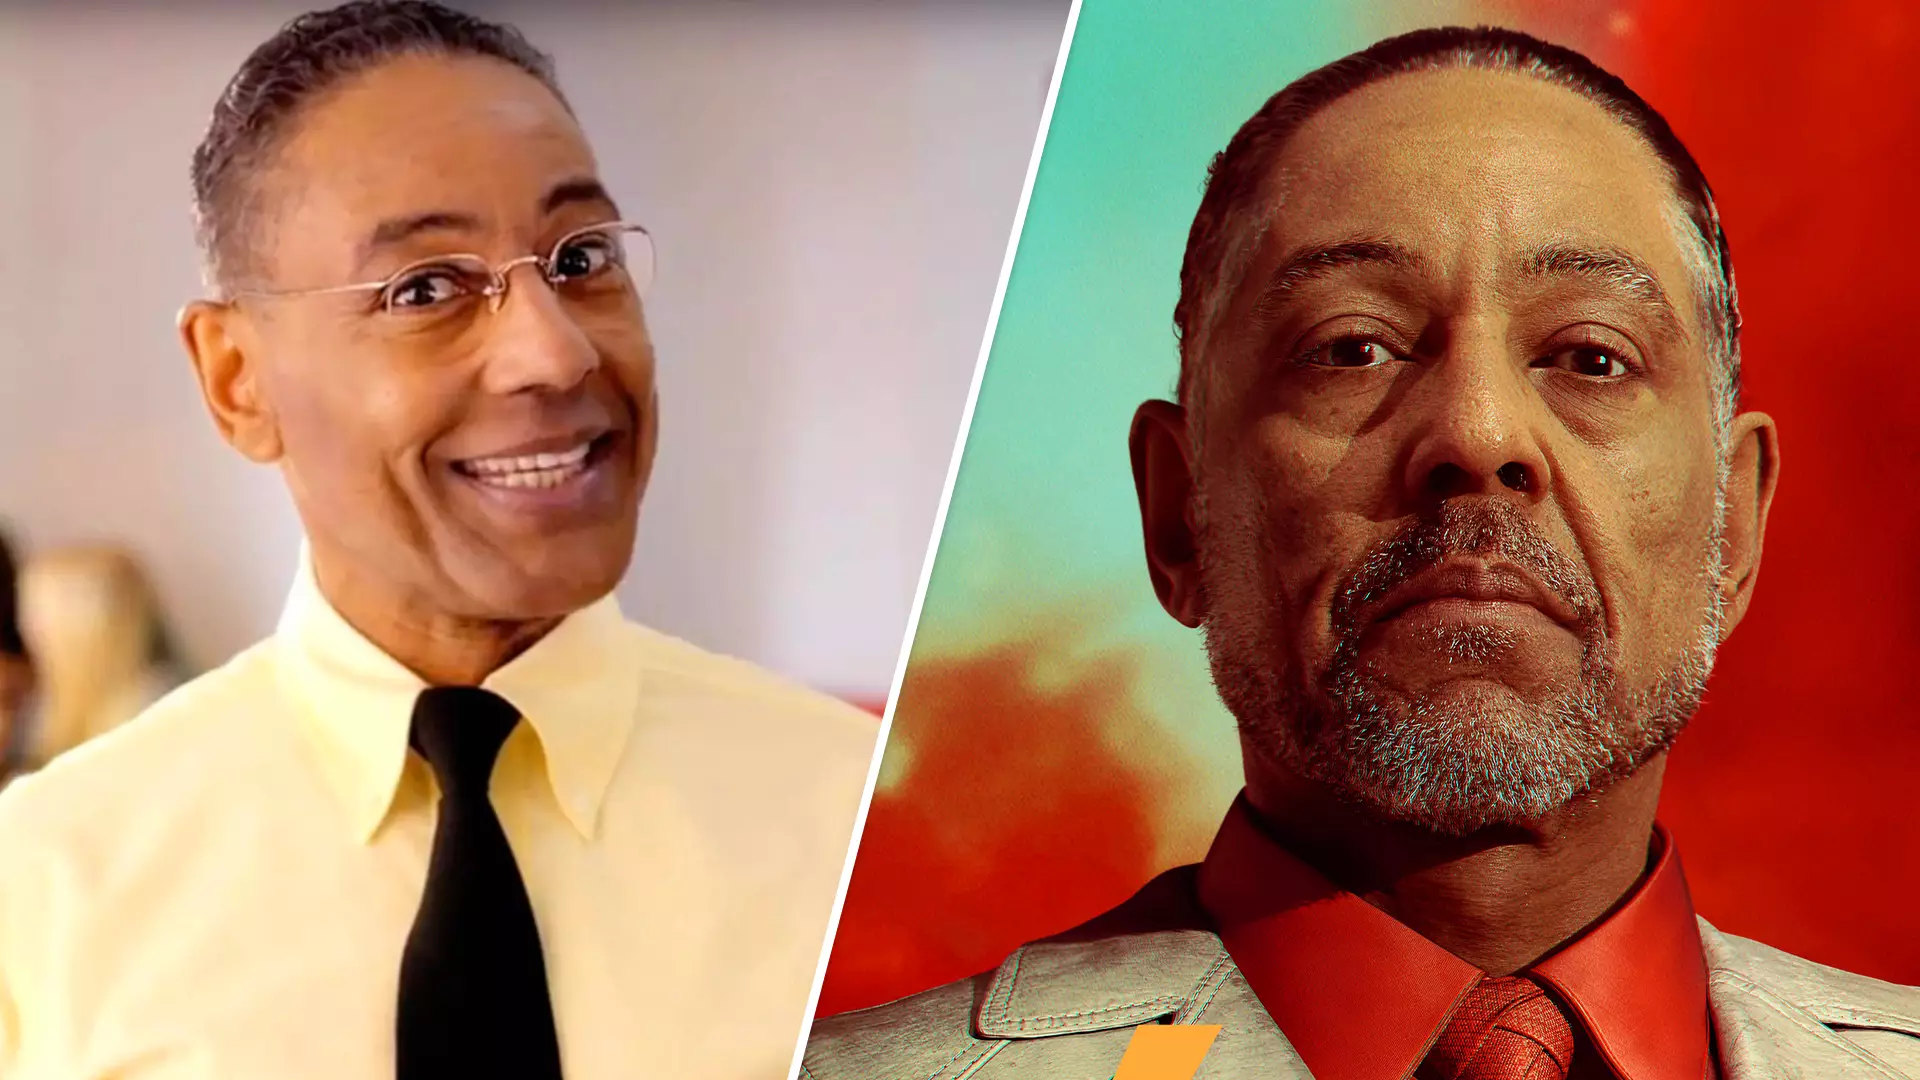 Giancarlo Esposito Brought His Own Props For 'Far Cry 6'